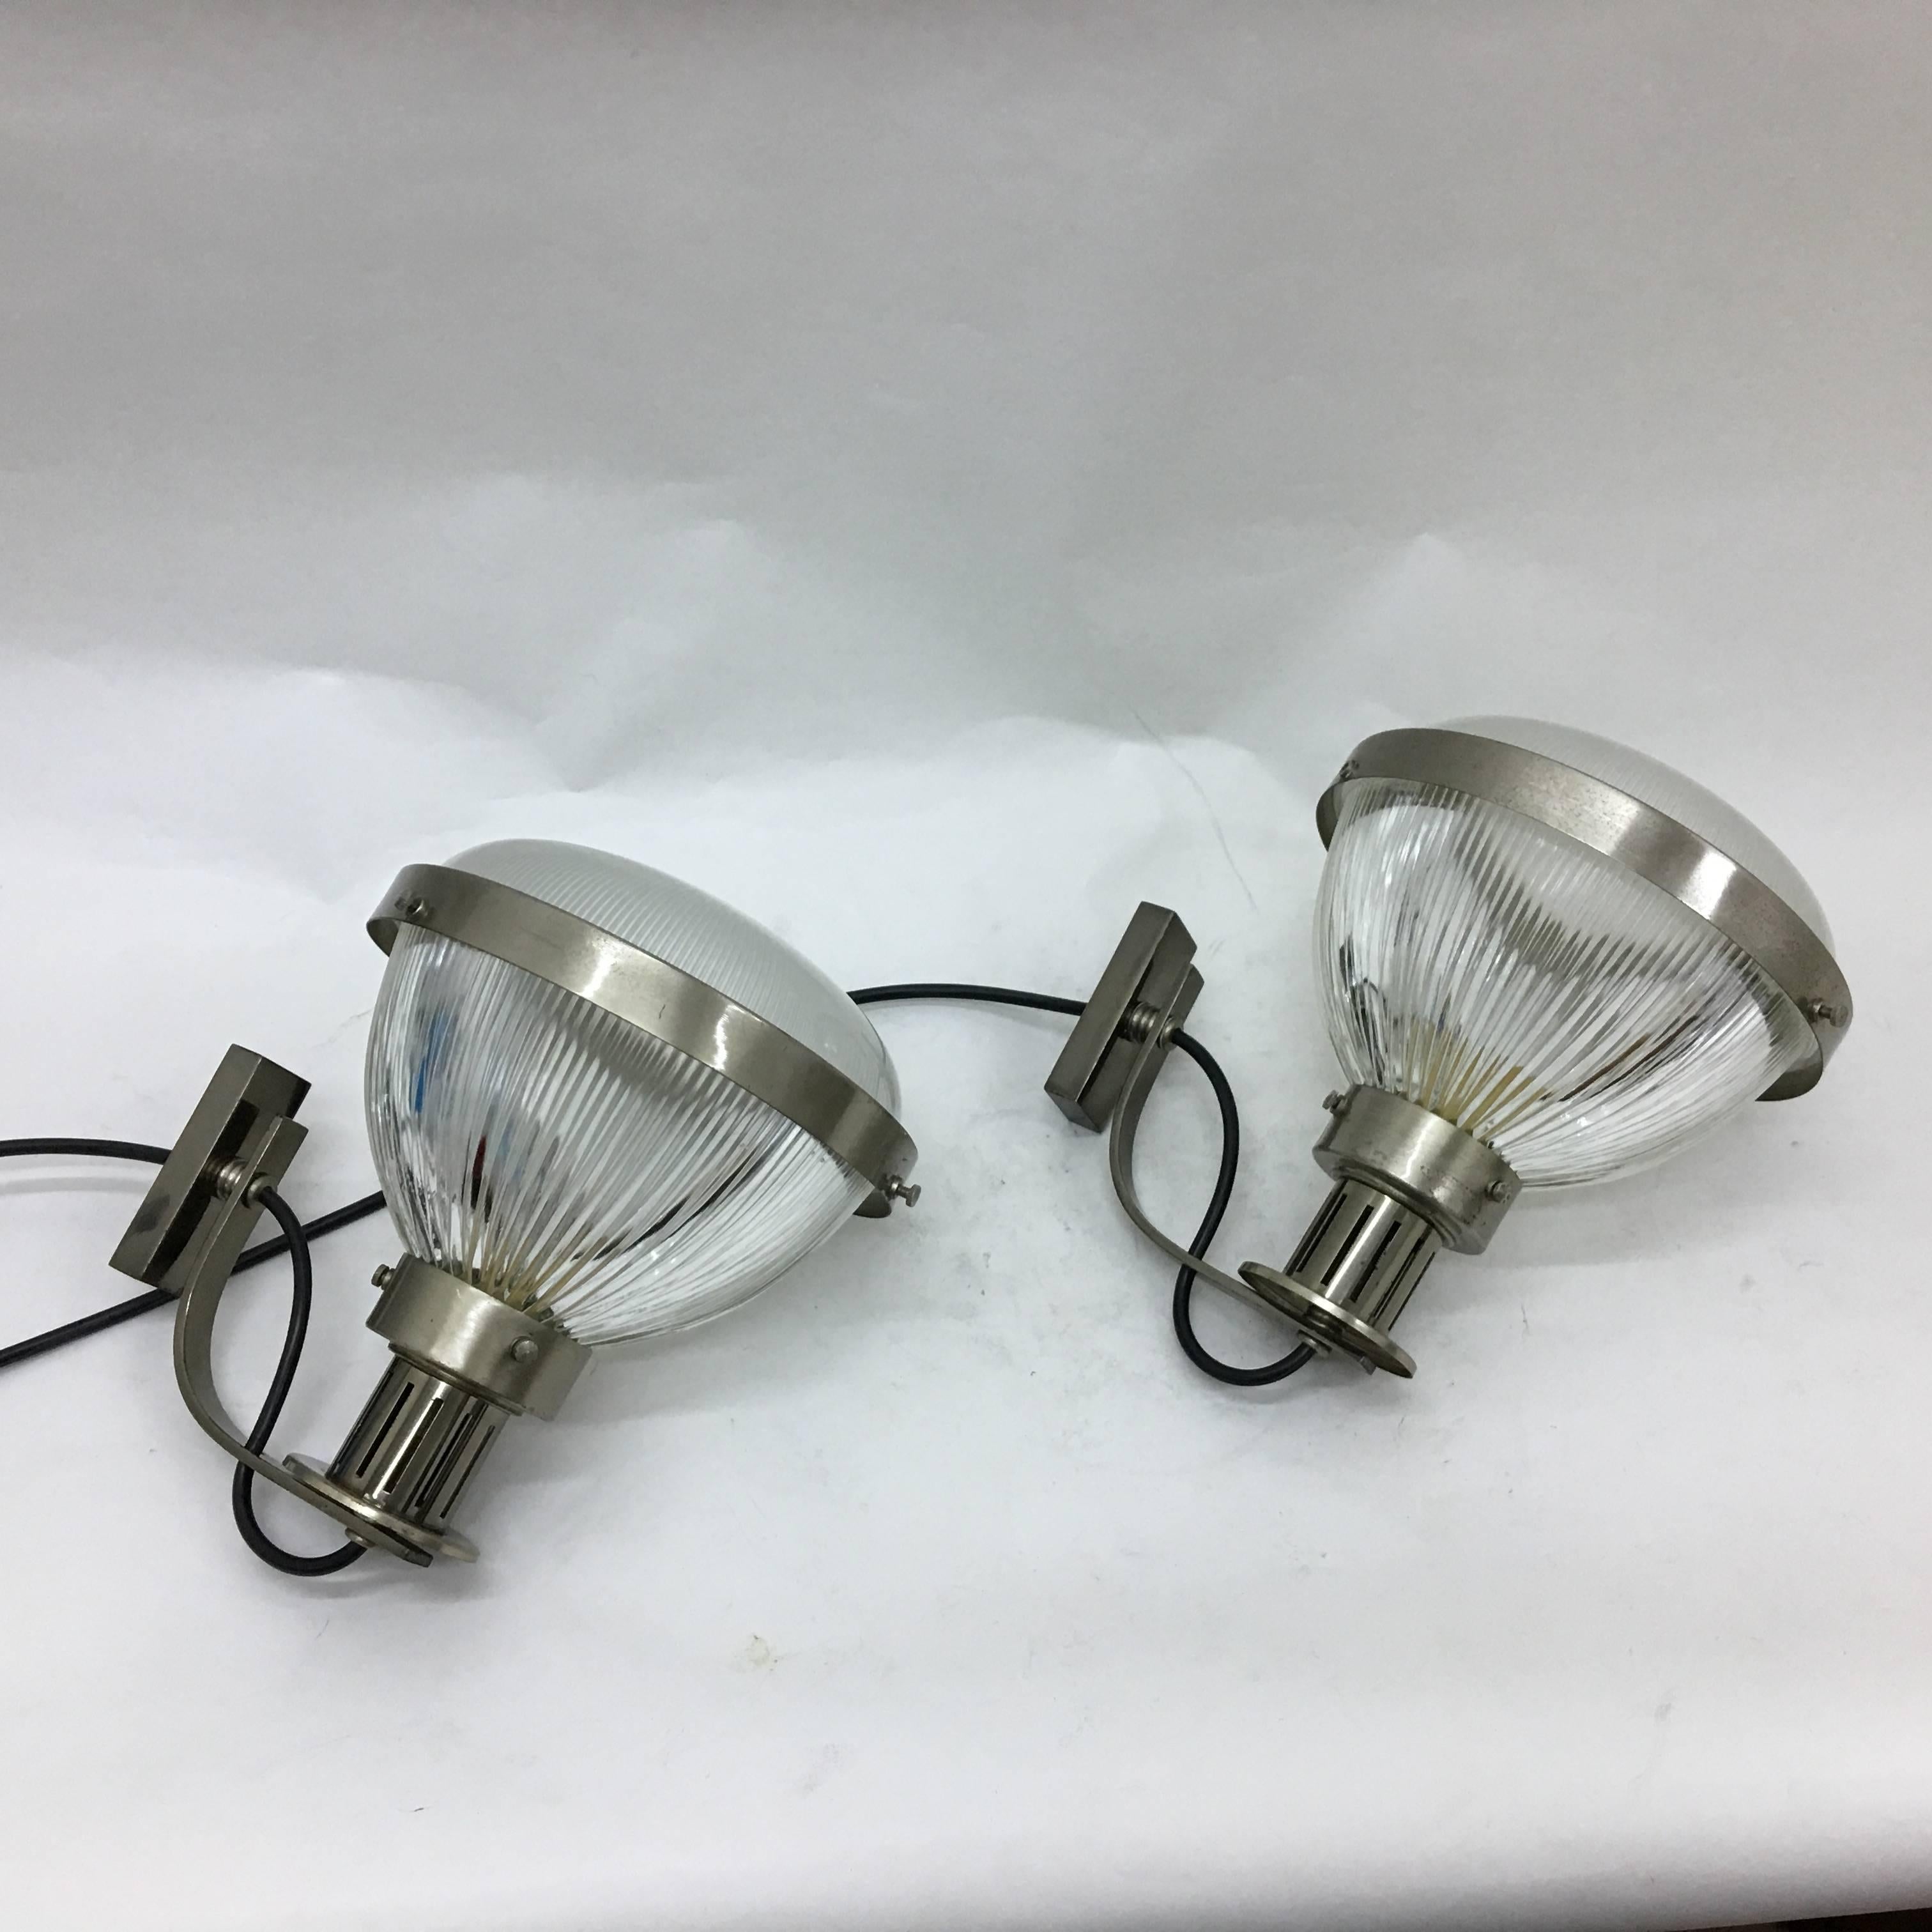 Amazing pair of wall lights by Ignazio Gardella for Azucena, good conditions overall, rewired, they works with 110-240 volts.